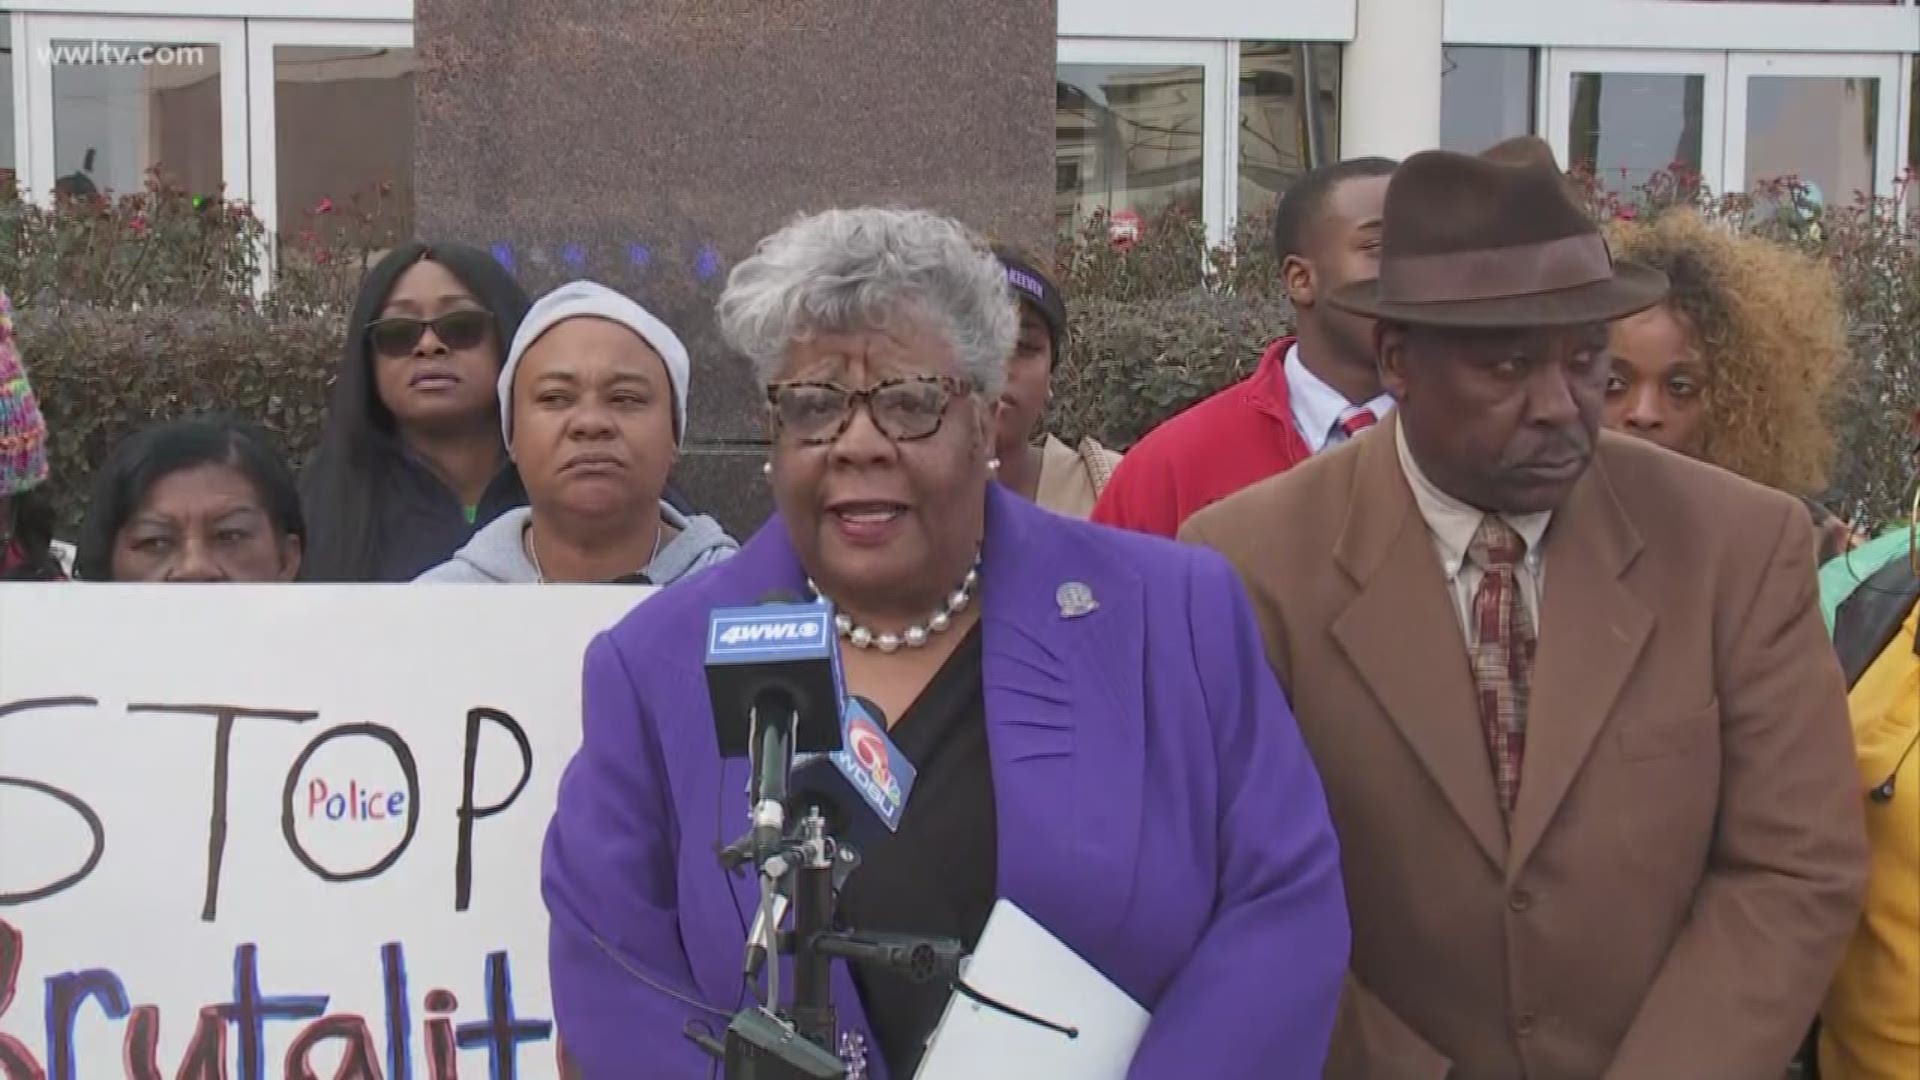 The NAACP and the family and friends of Keeven Robinson, who died in a struggle with police earlier this year, are upset that the investigation and findings are not progressing more quickly.